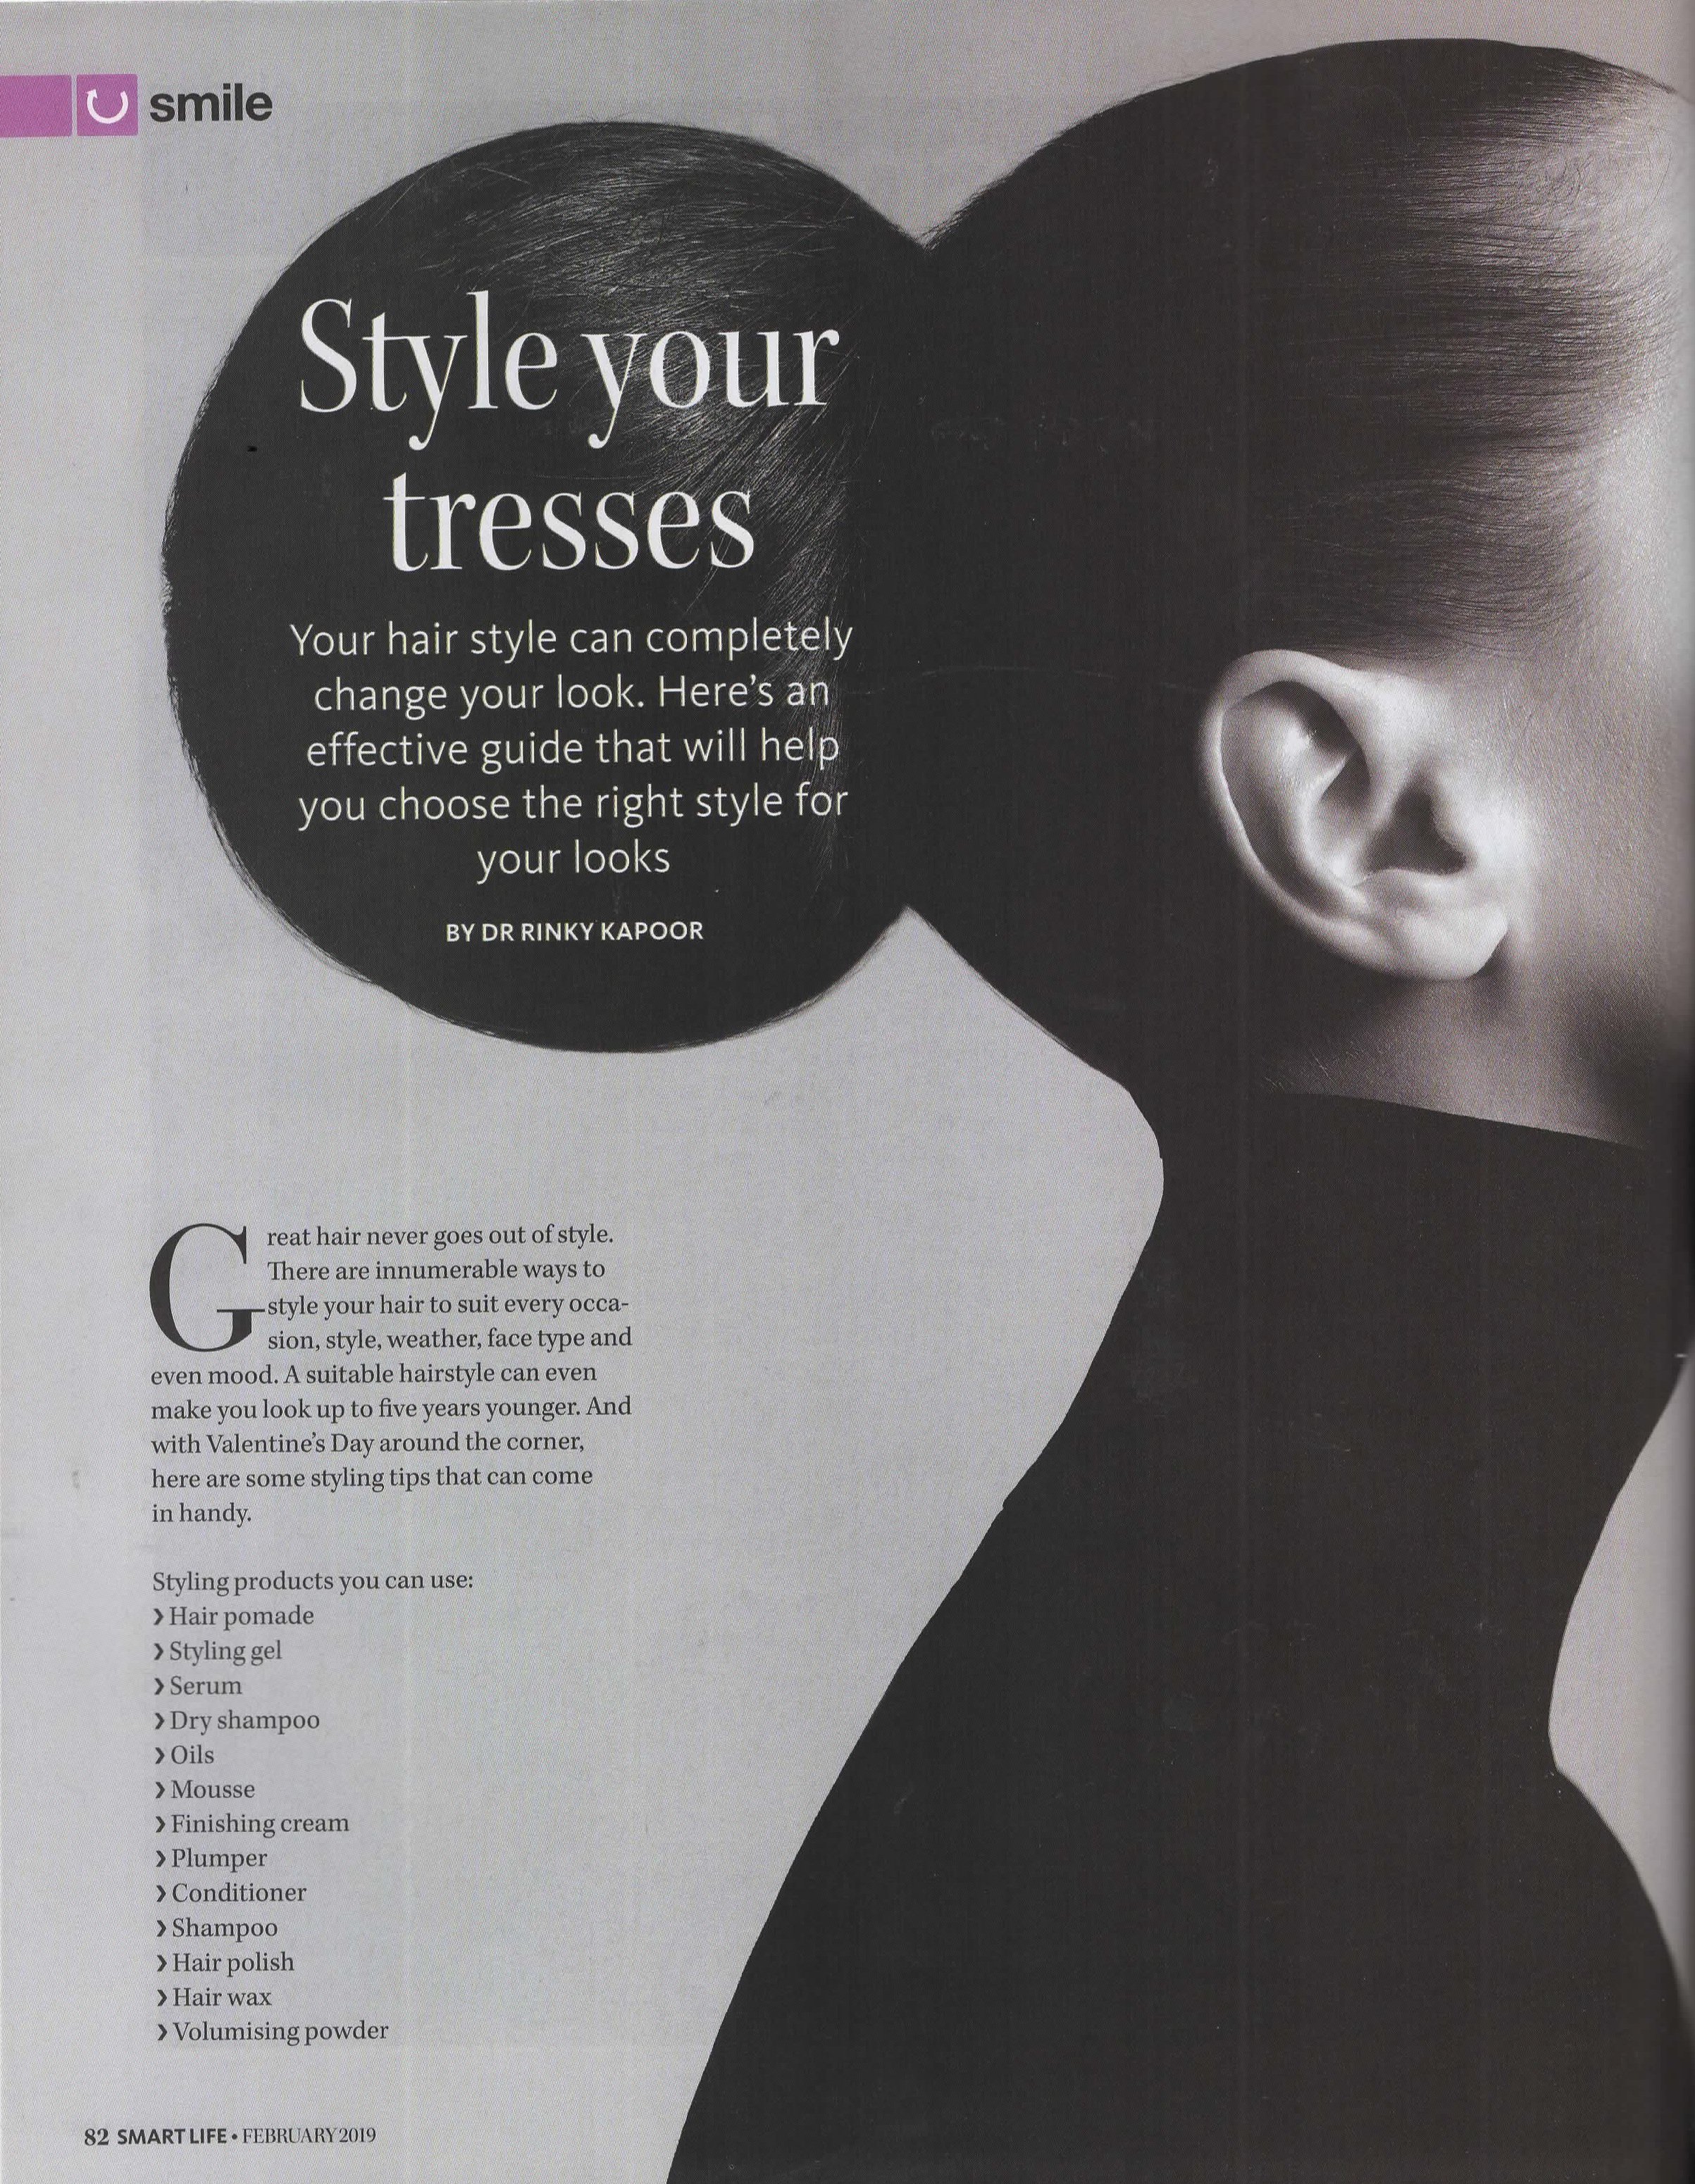 Style Your Tresses - Smart Life